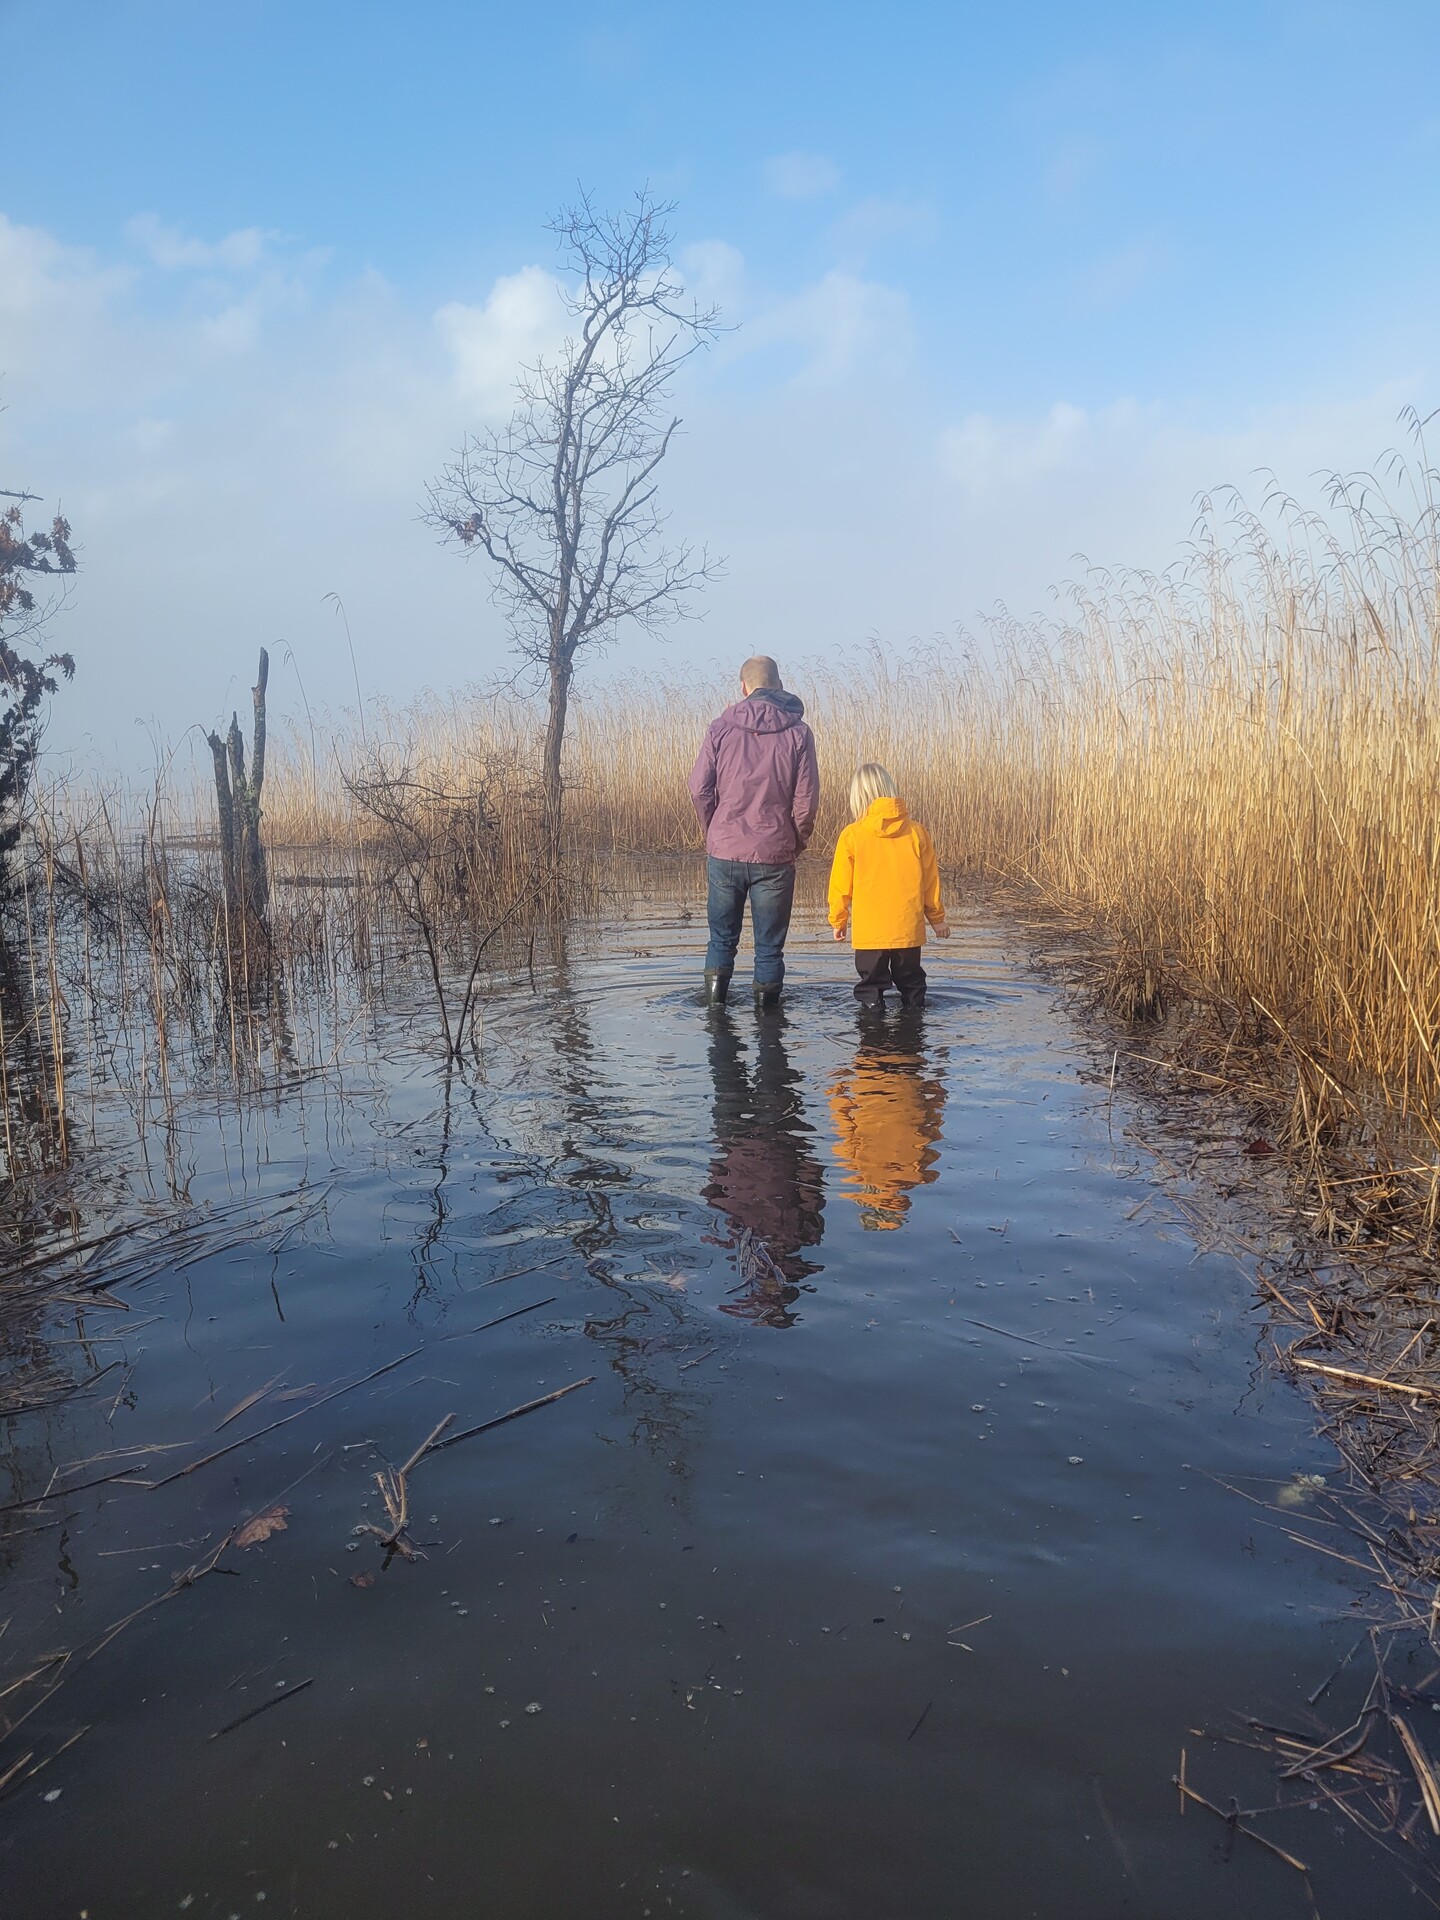 An adult and a child walk with rain jackets and boots on a flooded boardwalk, surrounded by trees and marsh grass.